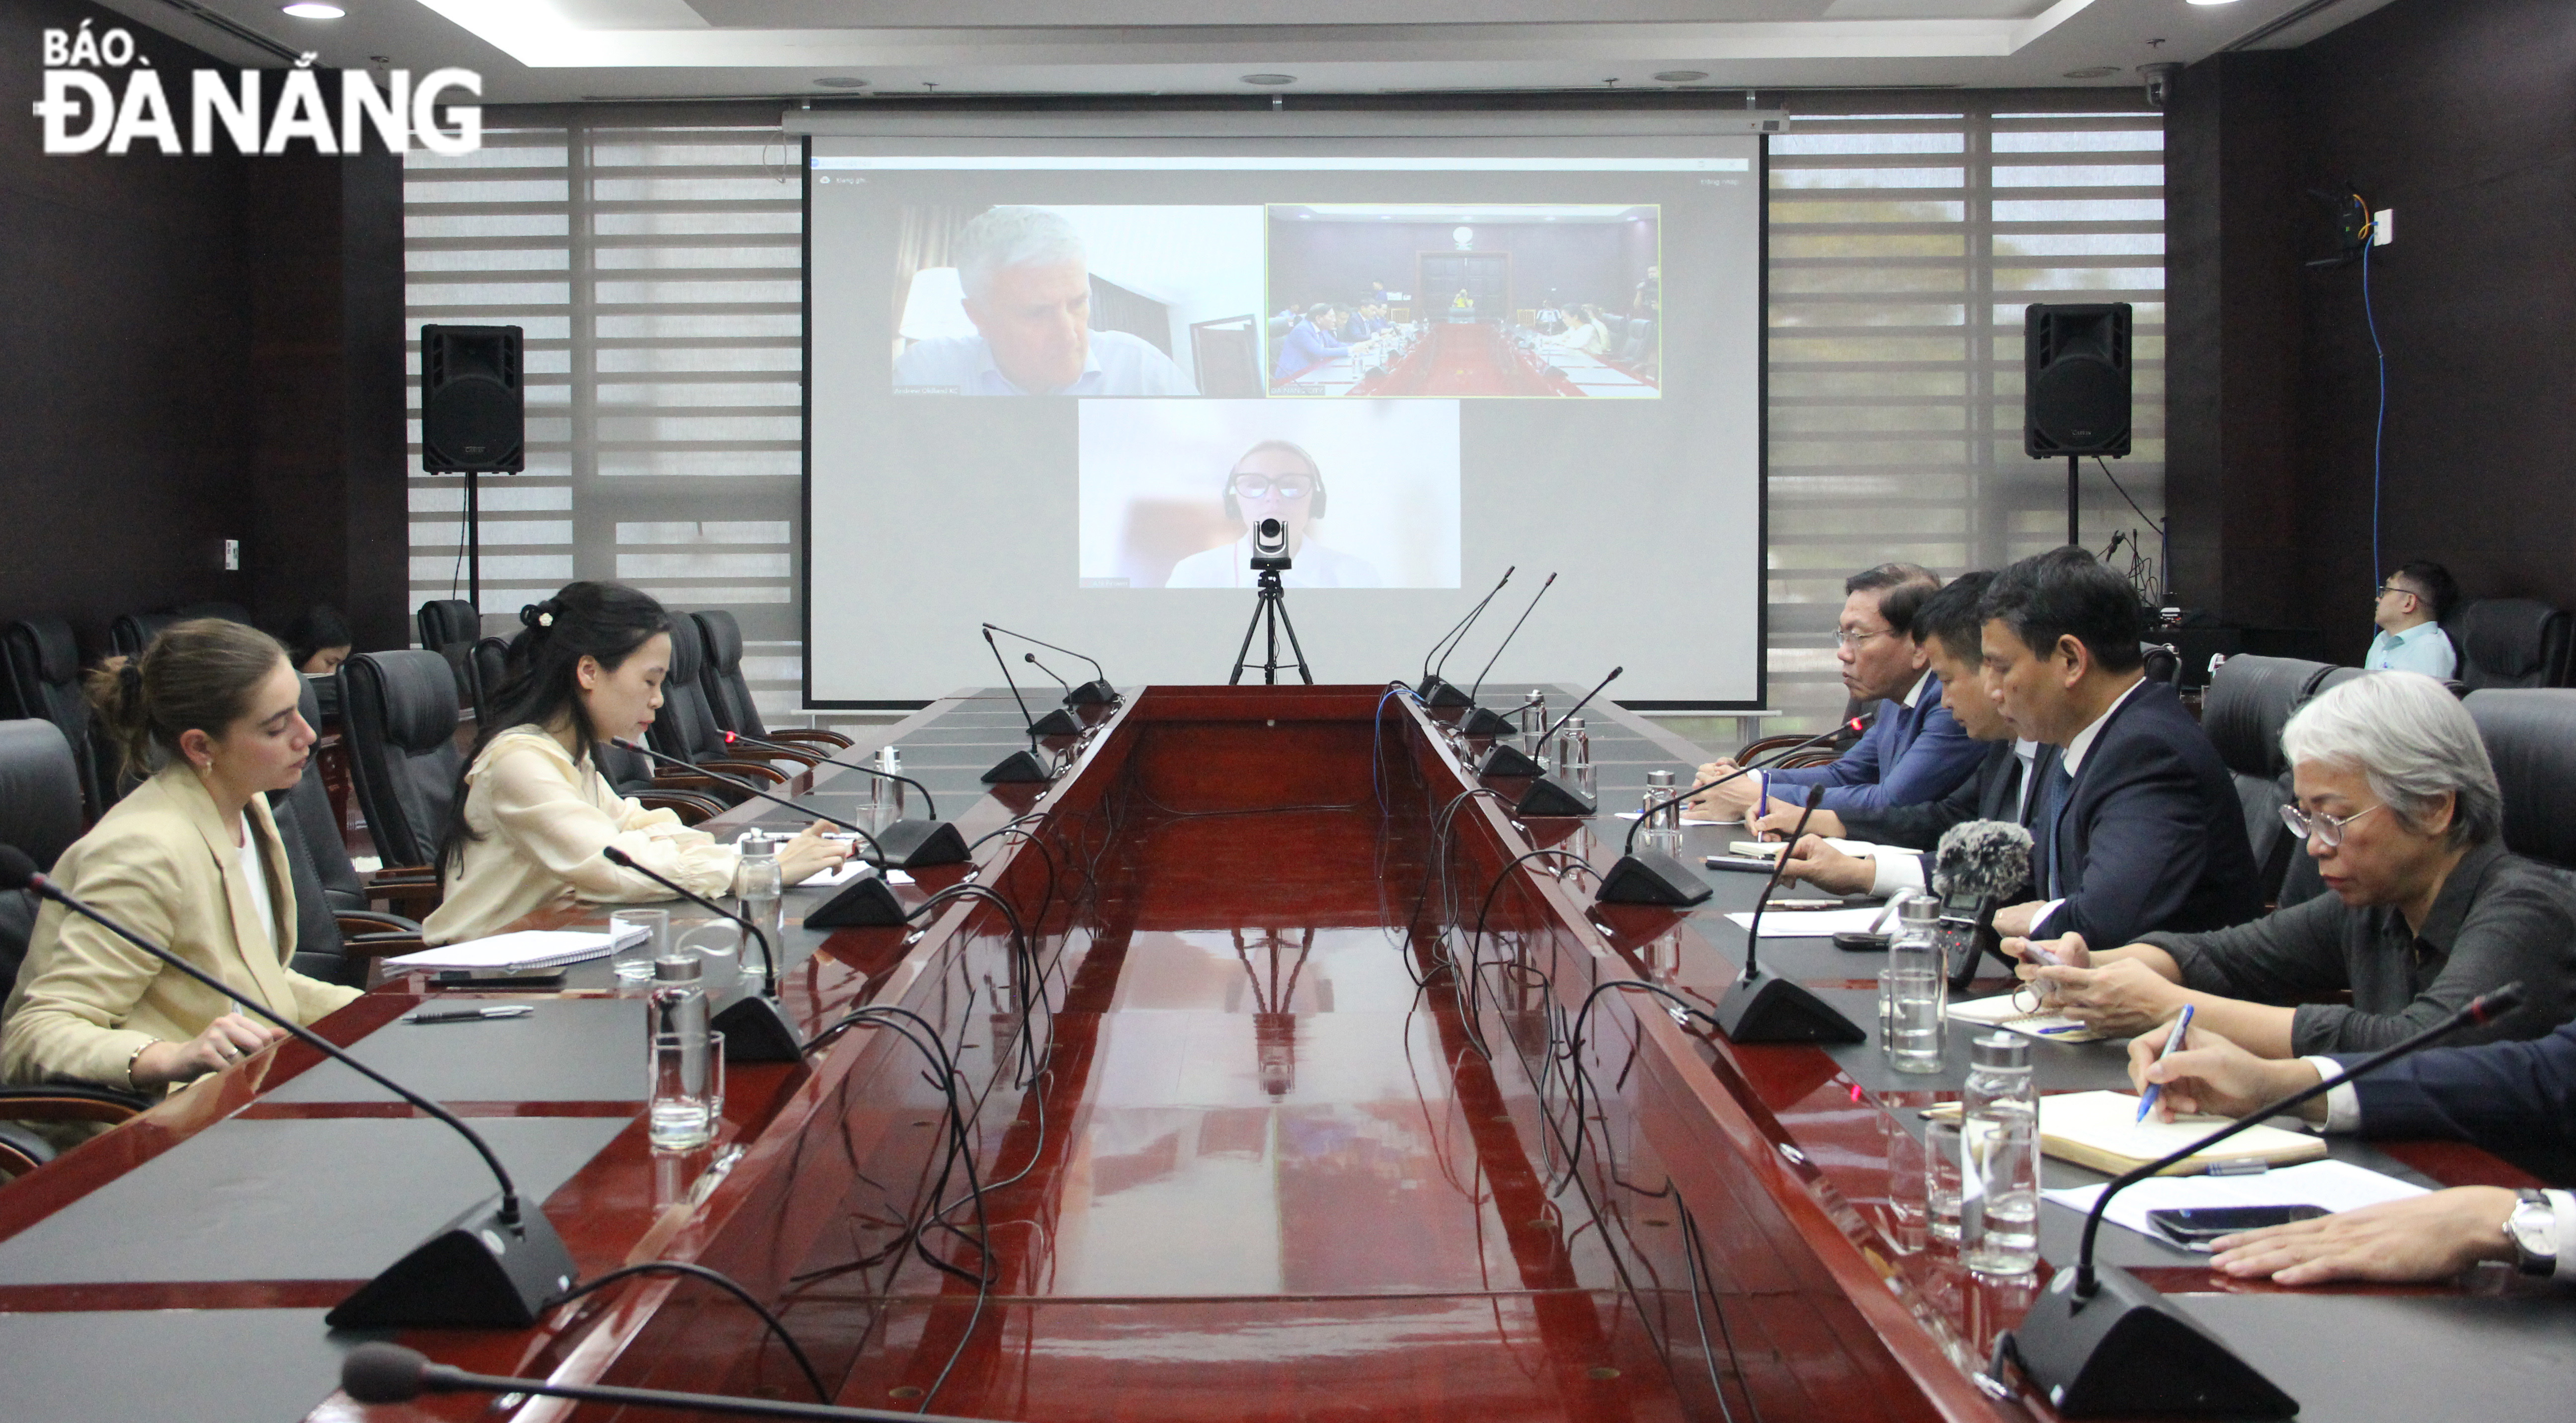 Vice Chairman of the Da Nang People's Committee Ho Ky Minh works with Mr. Andrew Oldland. Photo: XUAN HAU